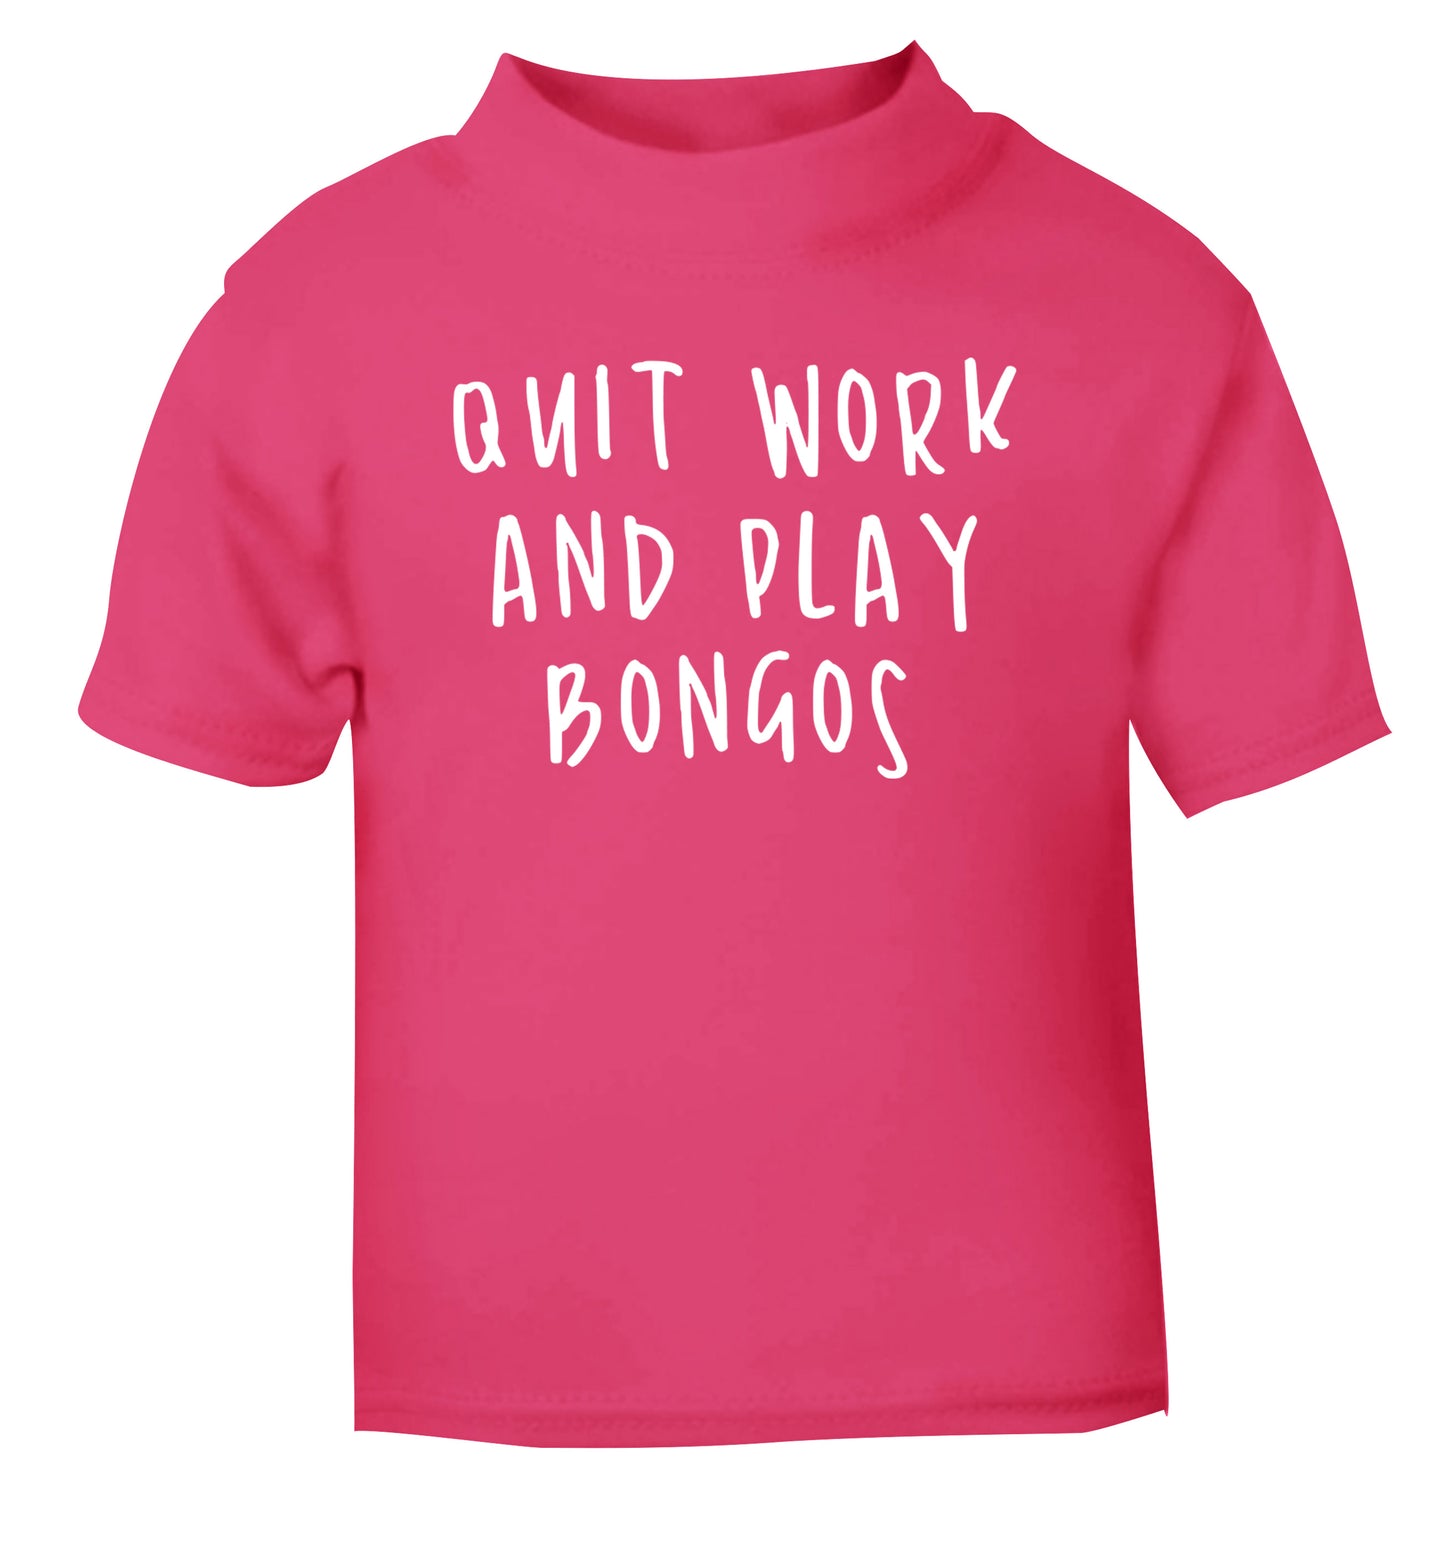 Quit work and play bongos pink Baby Toddler Tshirt 2 Years